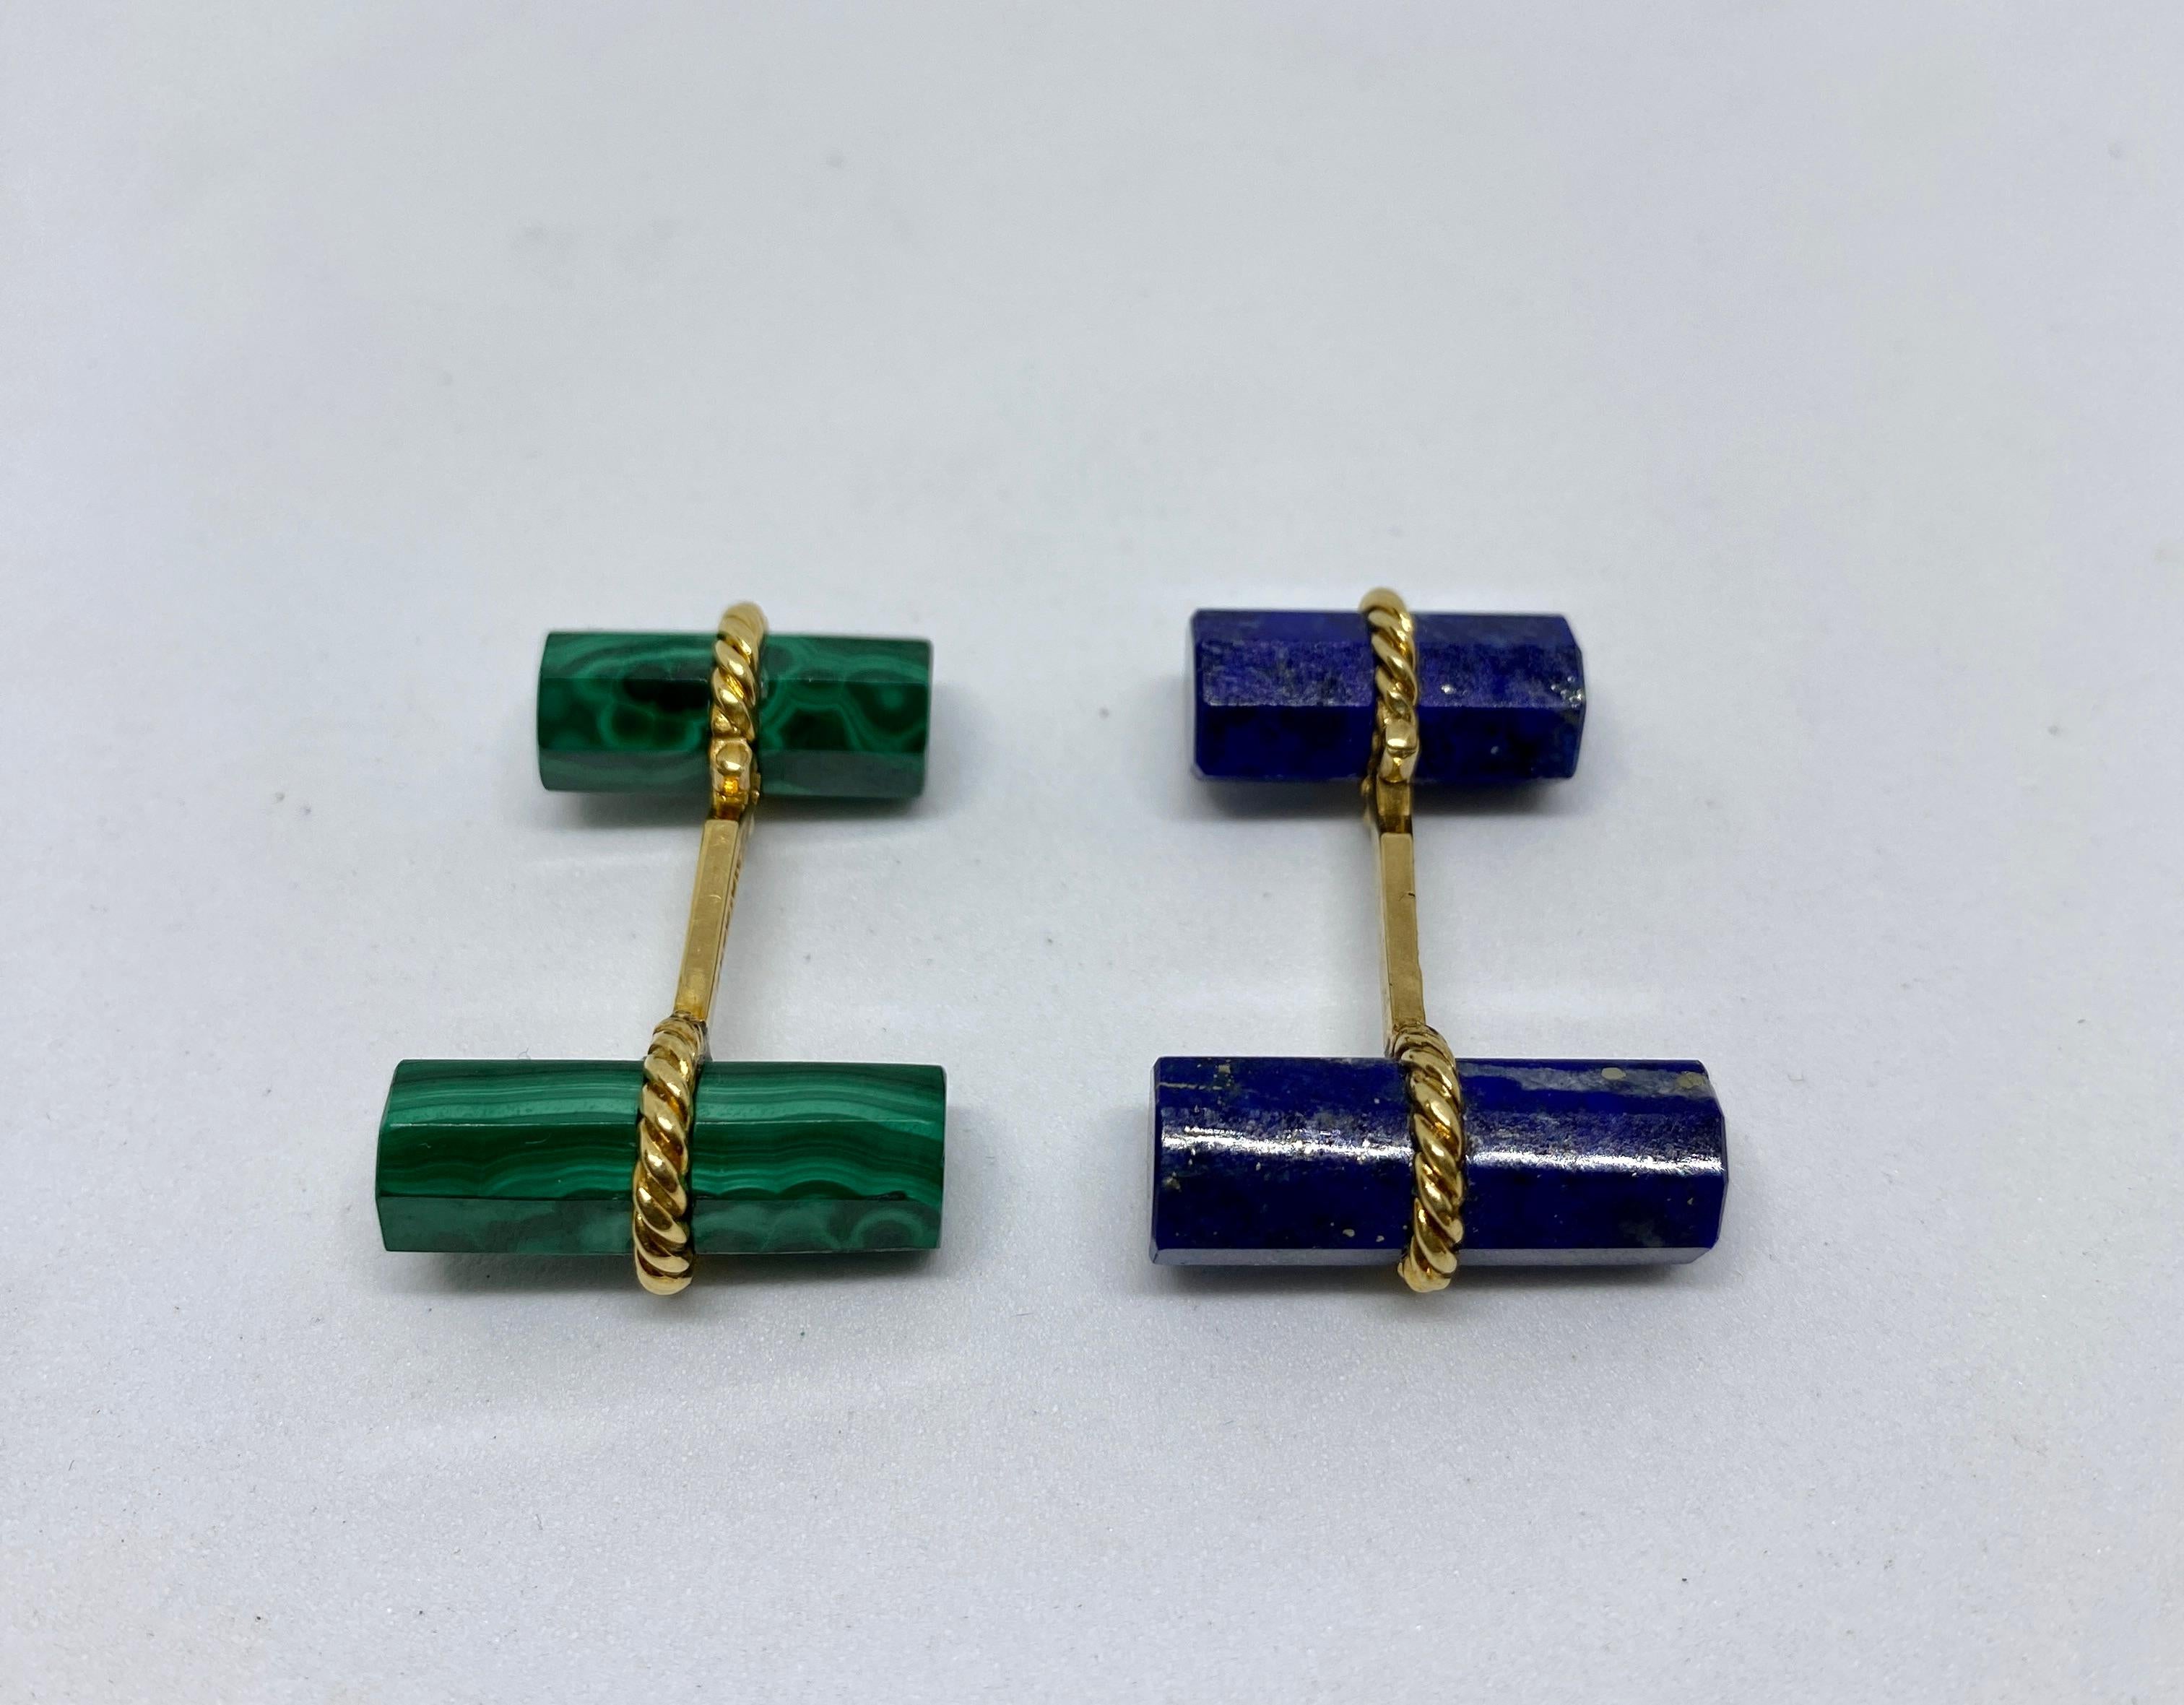 Set of 3 Vintage David Webb Cufflinks in Malachite, Lapis and 18K Yellow Gold In Good Condition For Sale In San Rafael, CA